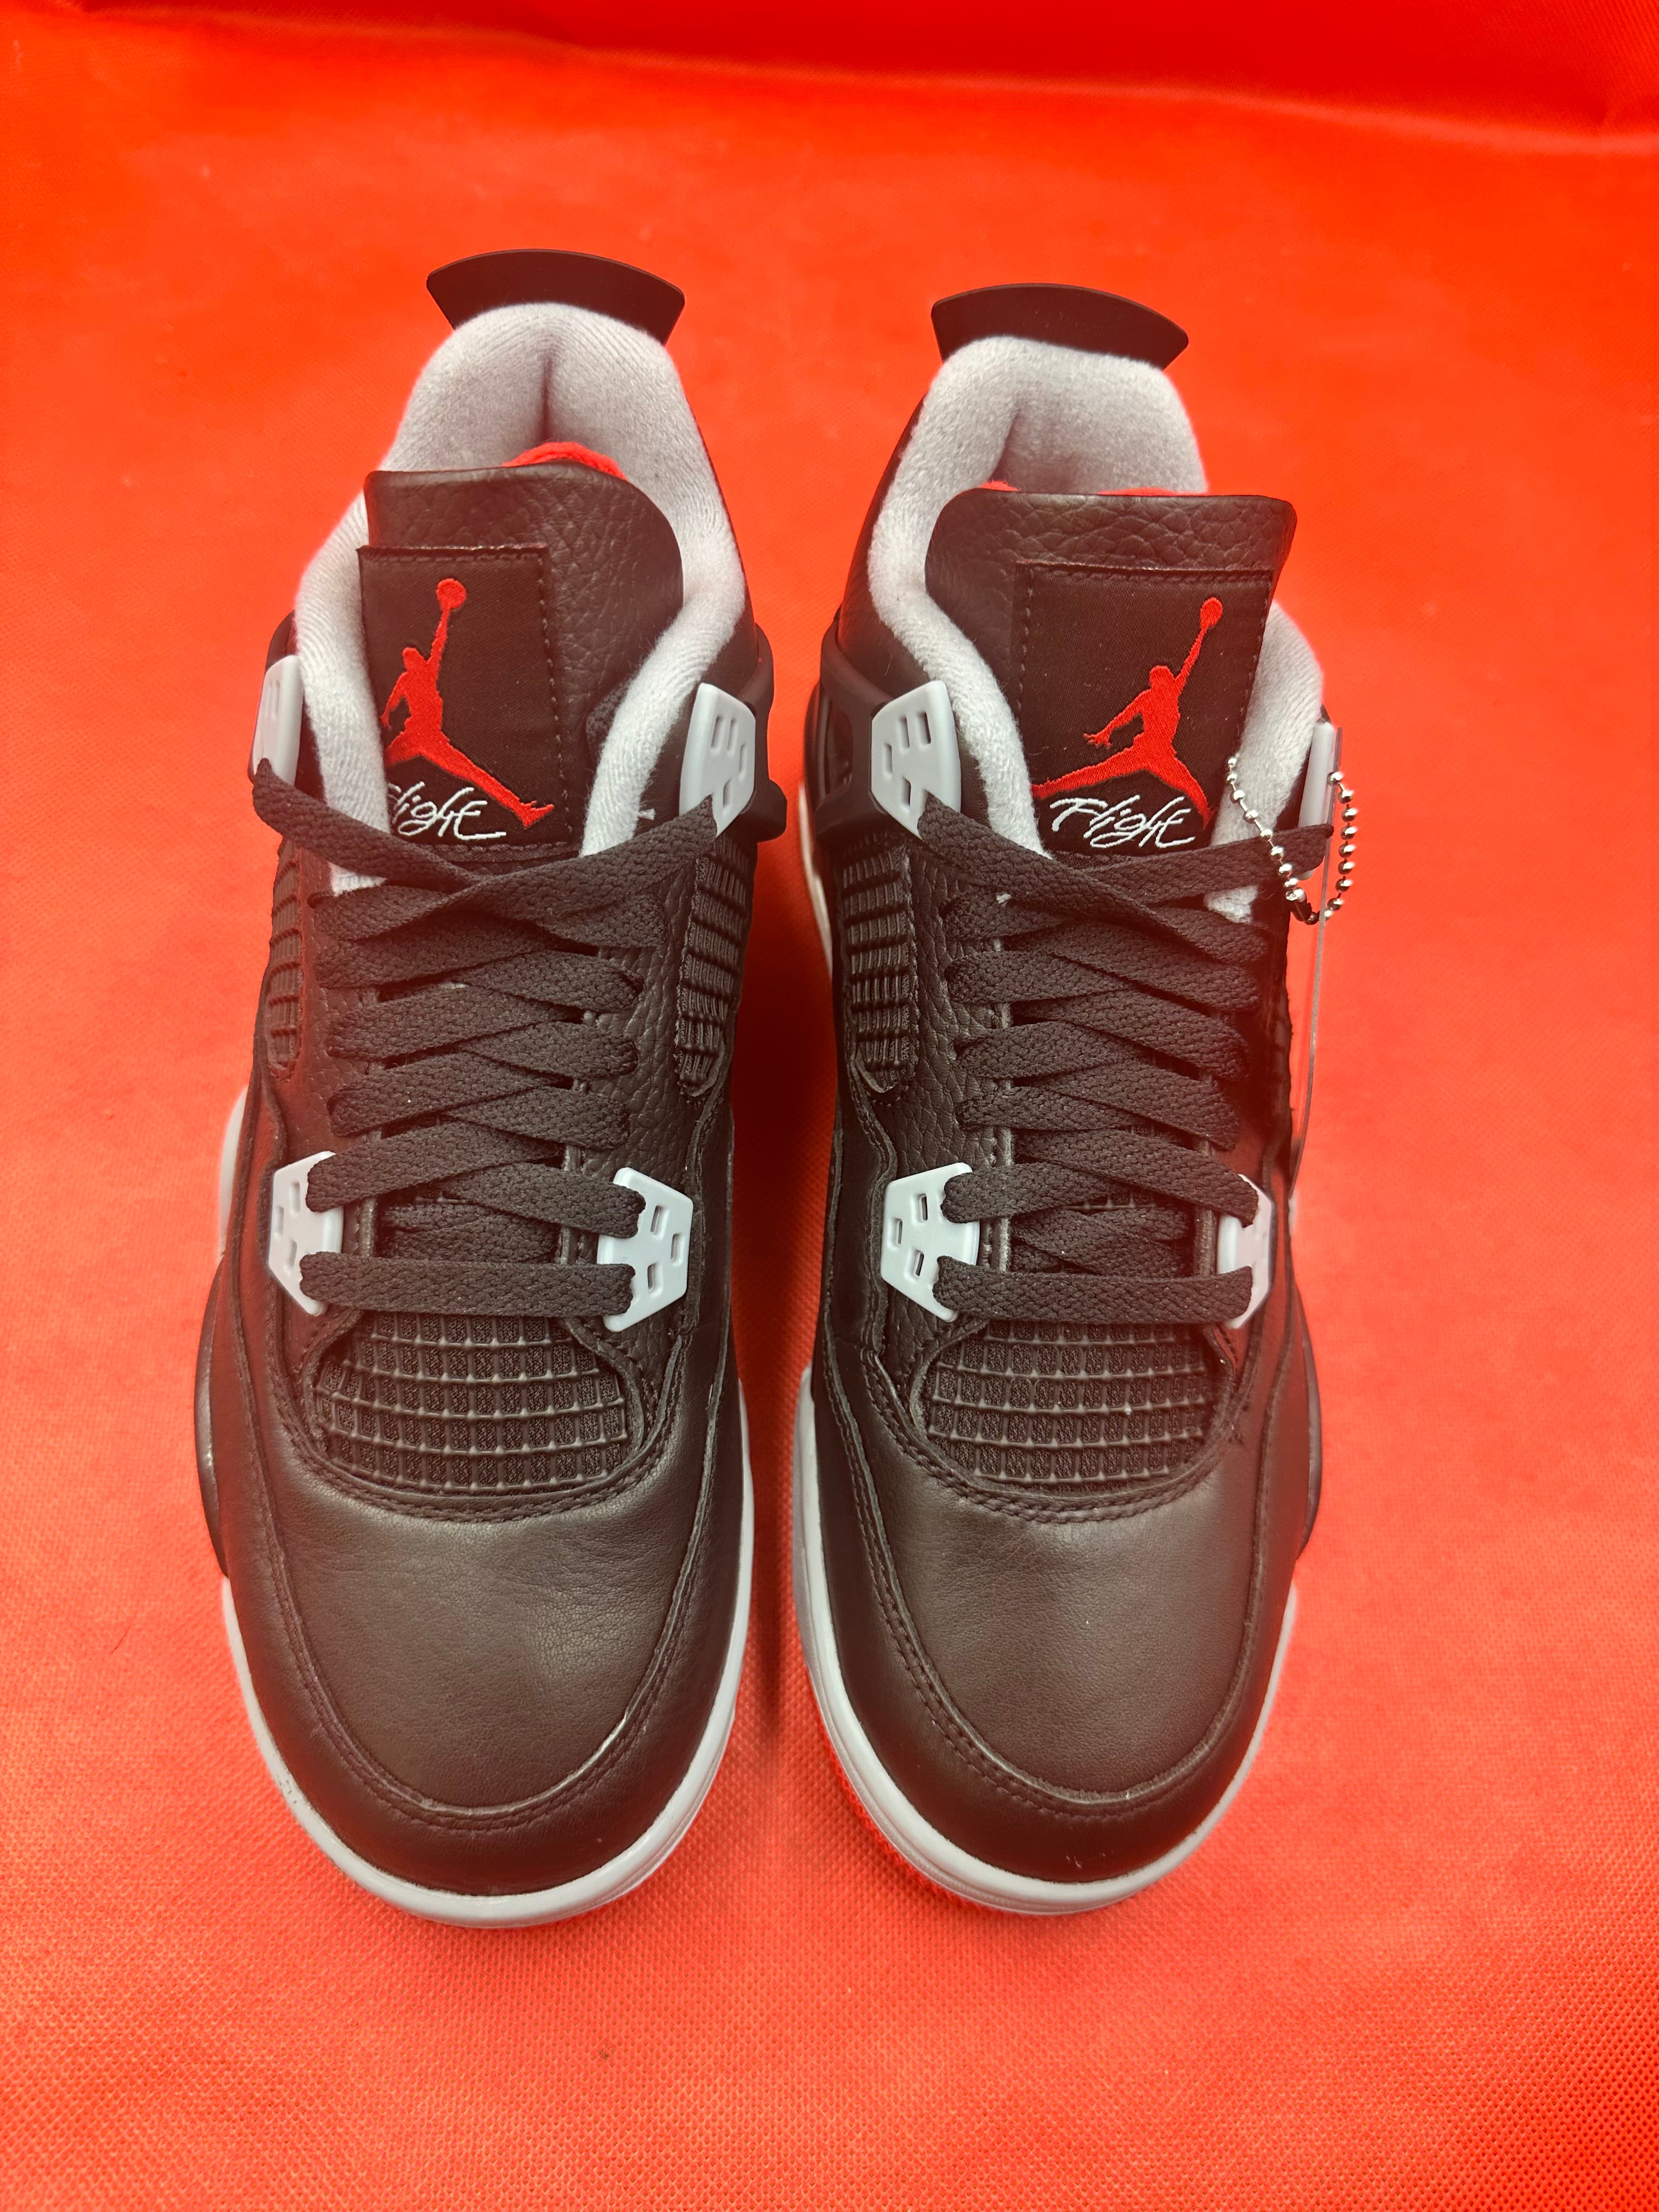 Brand New Reimagined Bred 4s Size 6